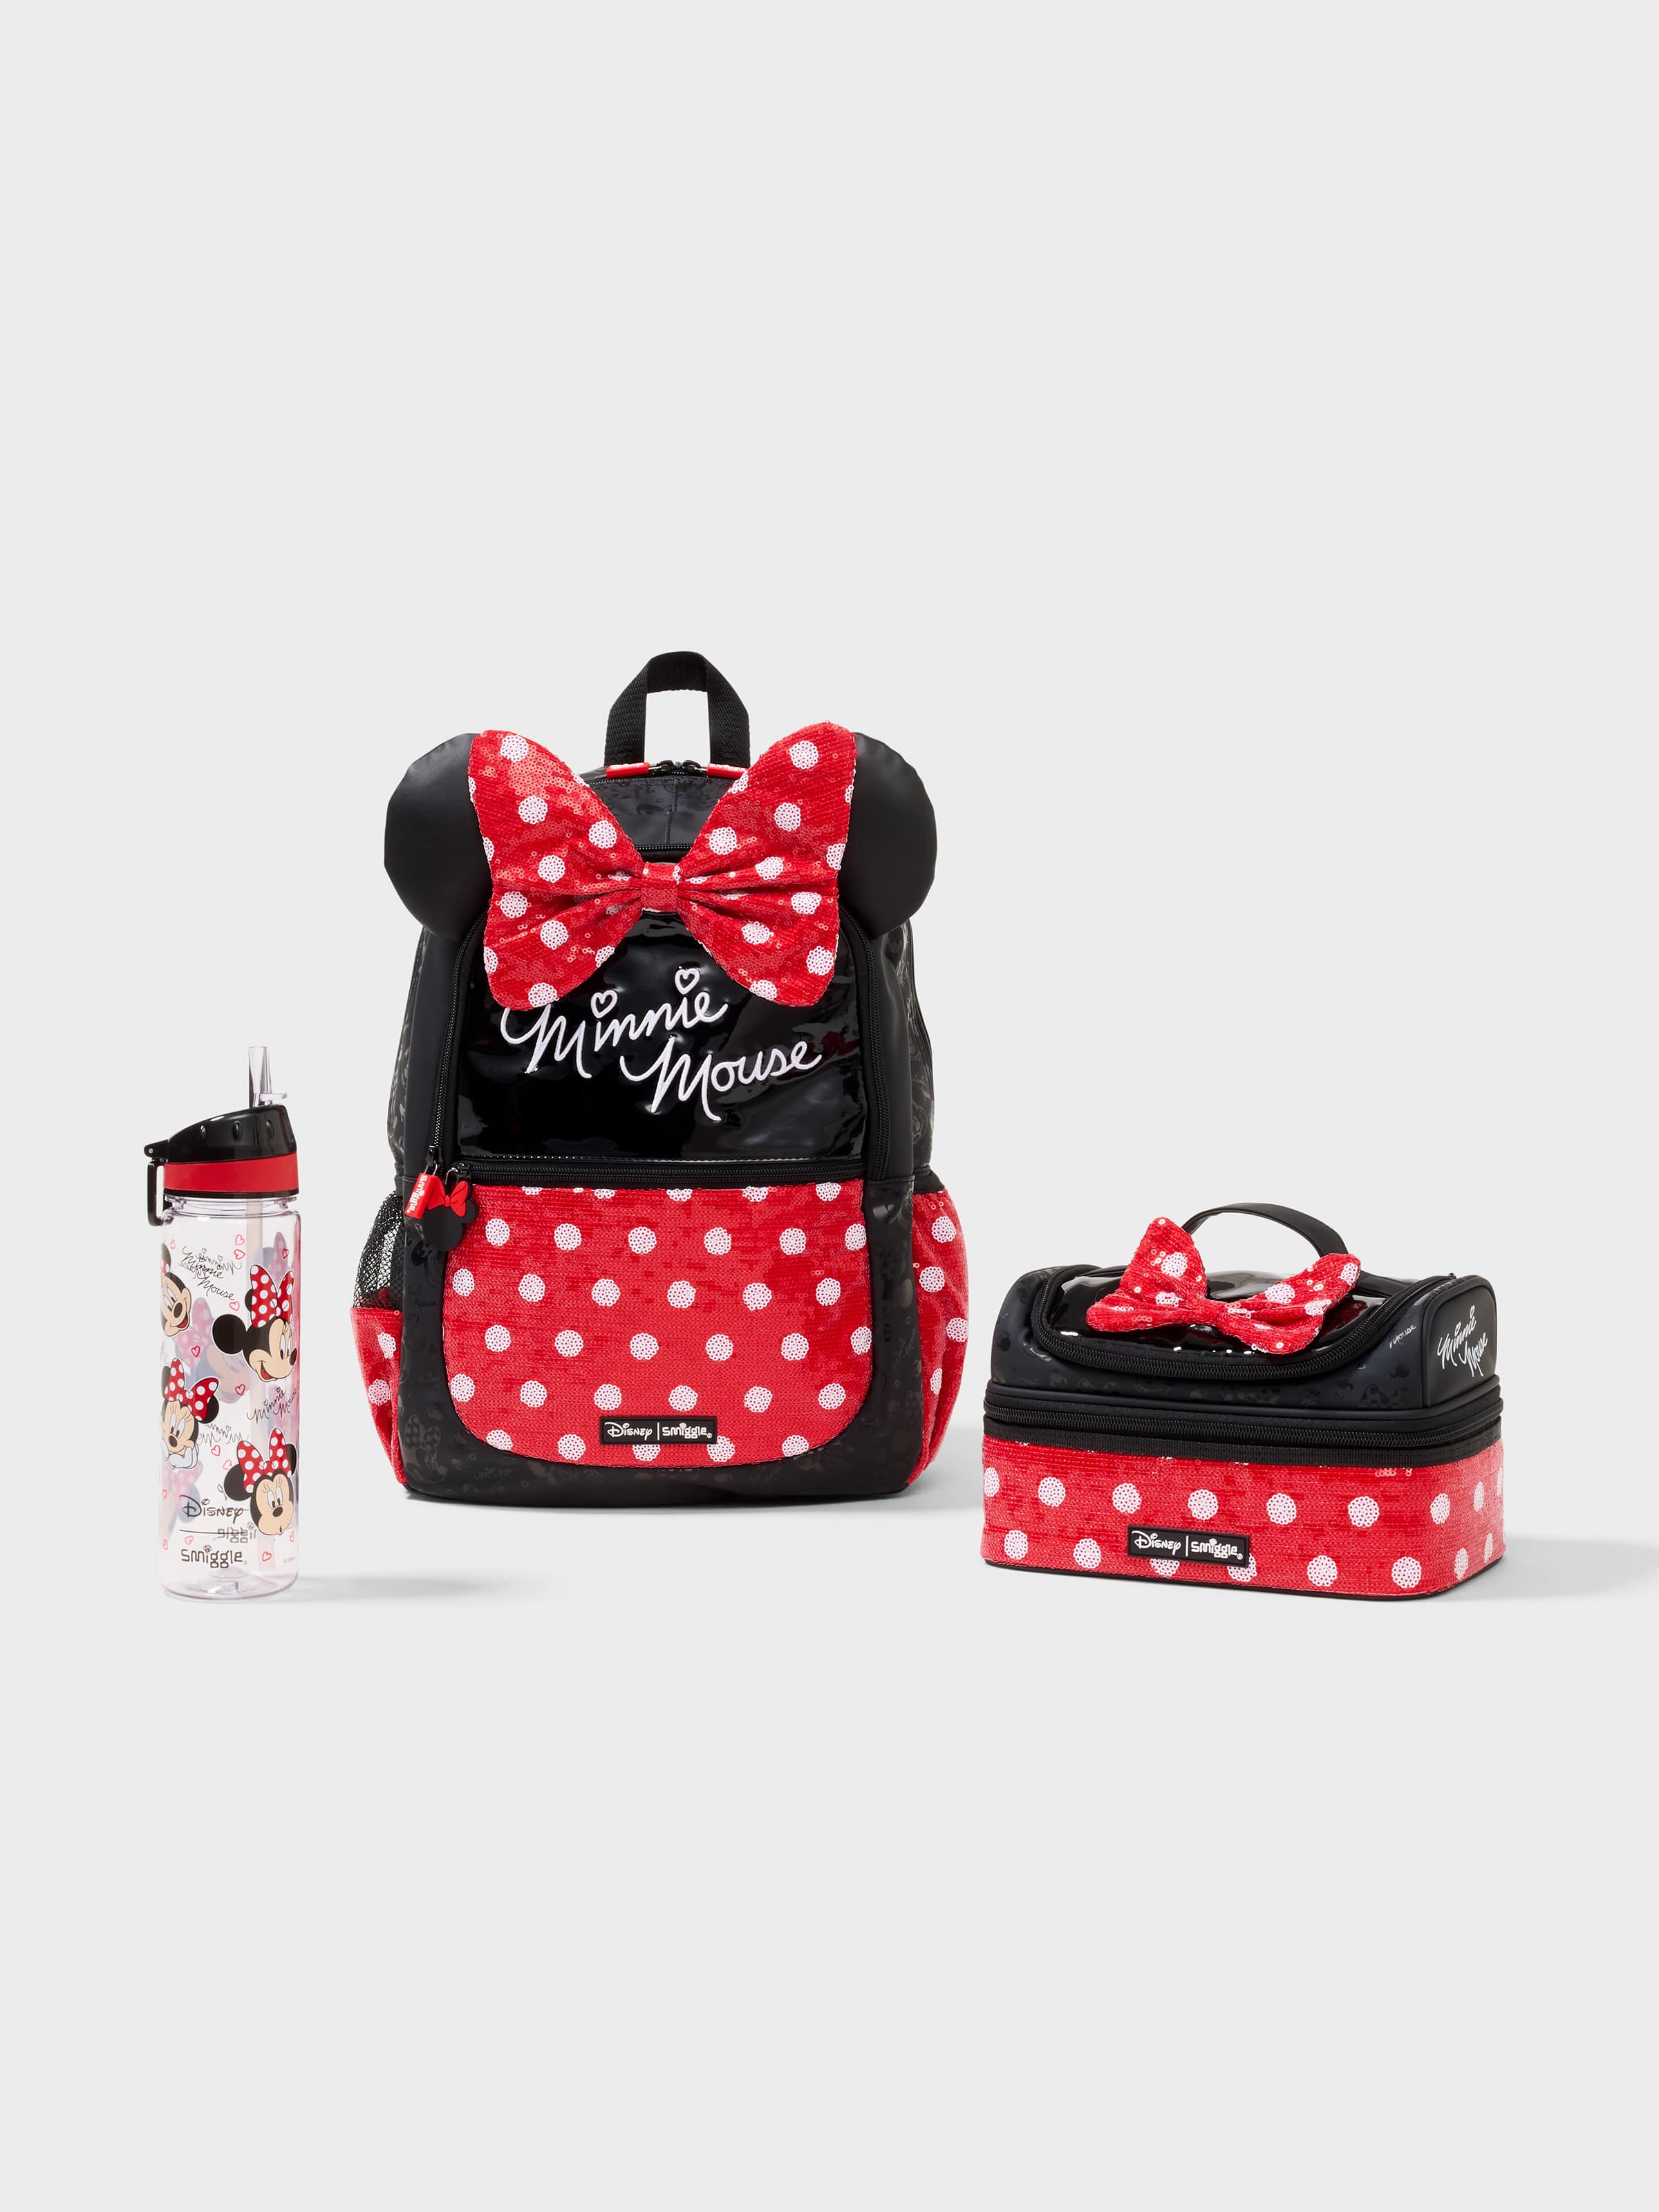 Minnie Mouse Girls Lunch Box Set (Pack Of 3)